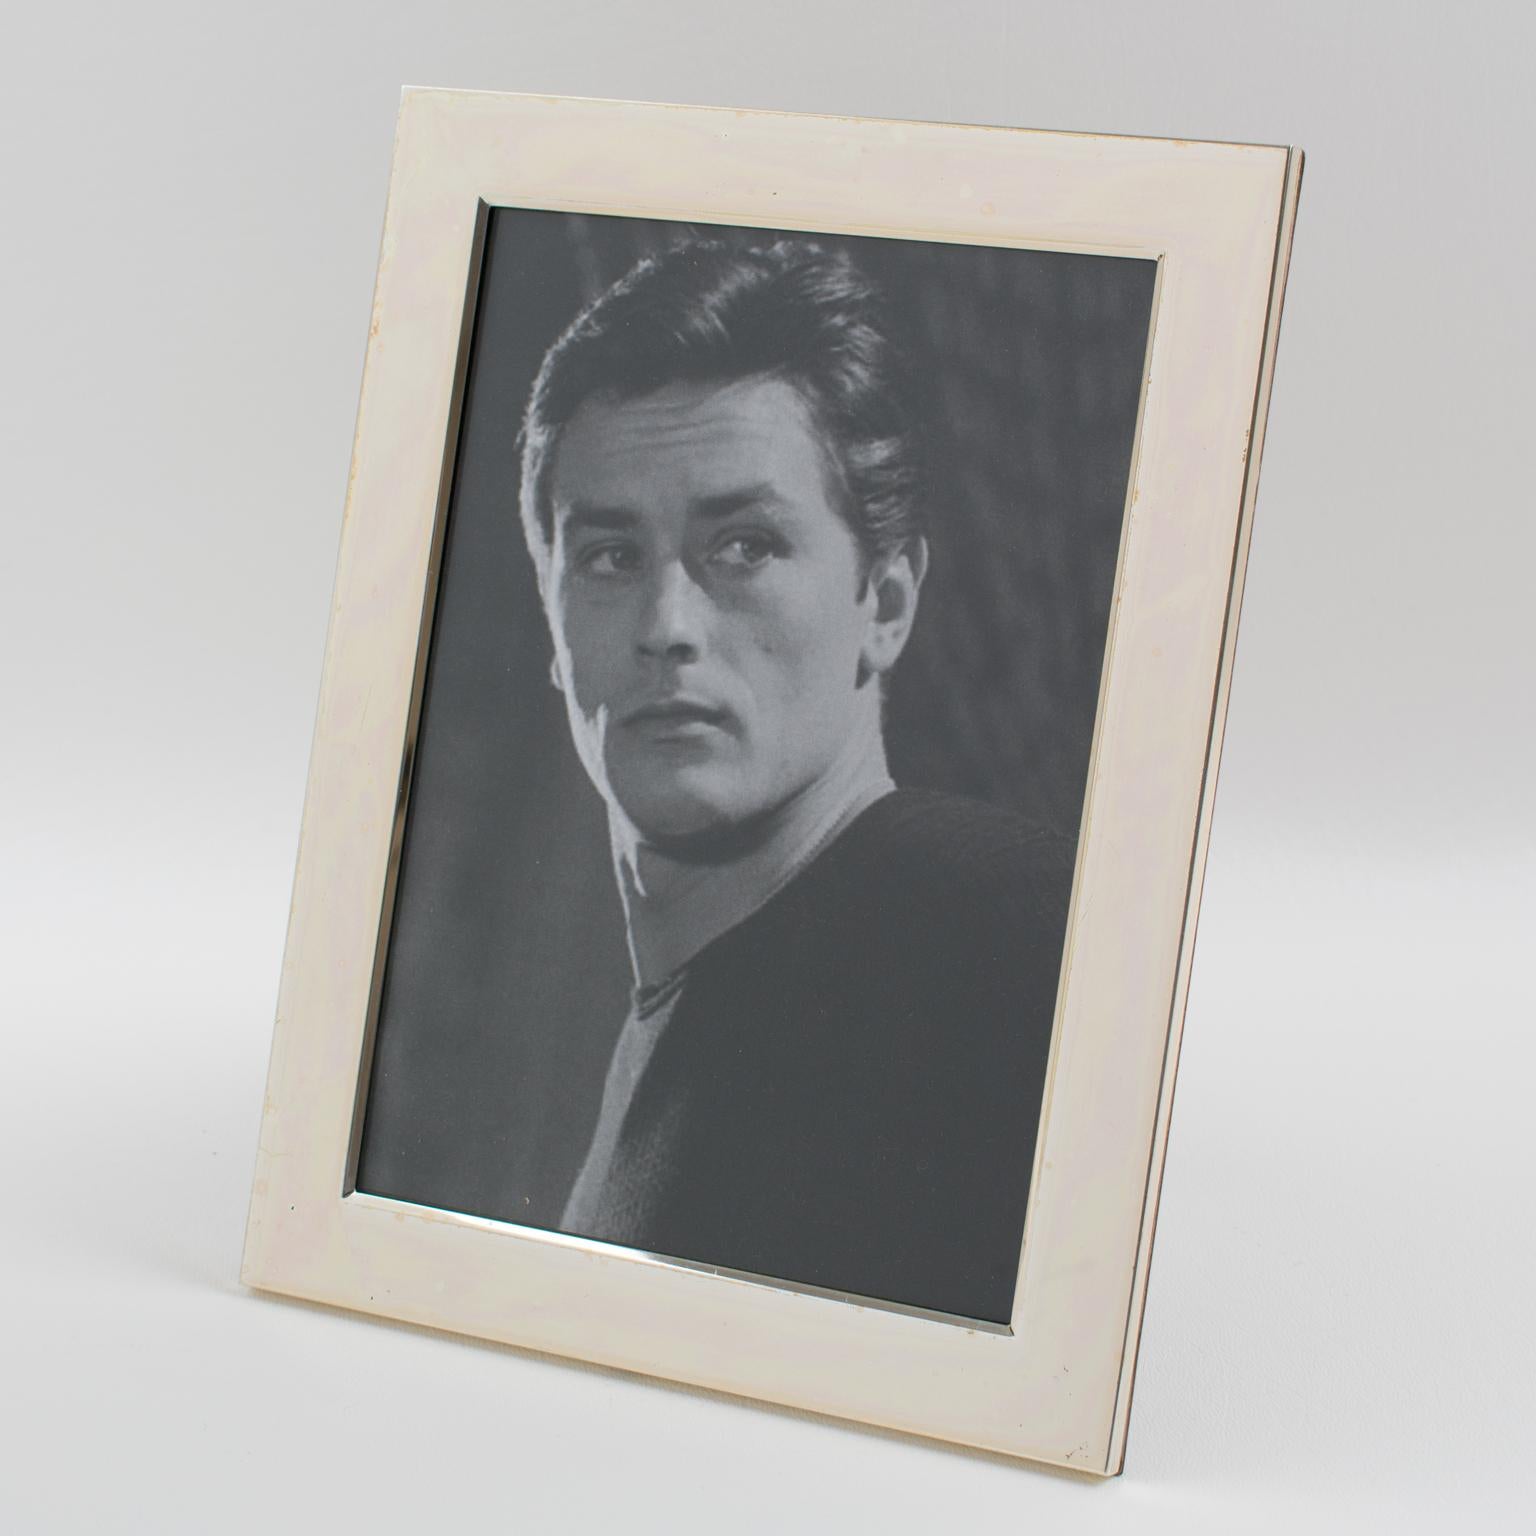 Elegant Italian picture photo frame. A timeless polished silver plate in a streamlined design. Rich high gloss walnut wood back and easel. Marked on the easel 